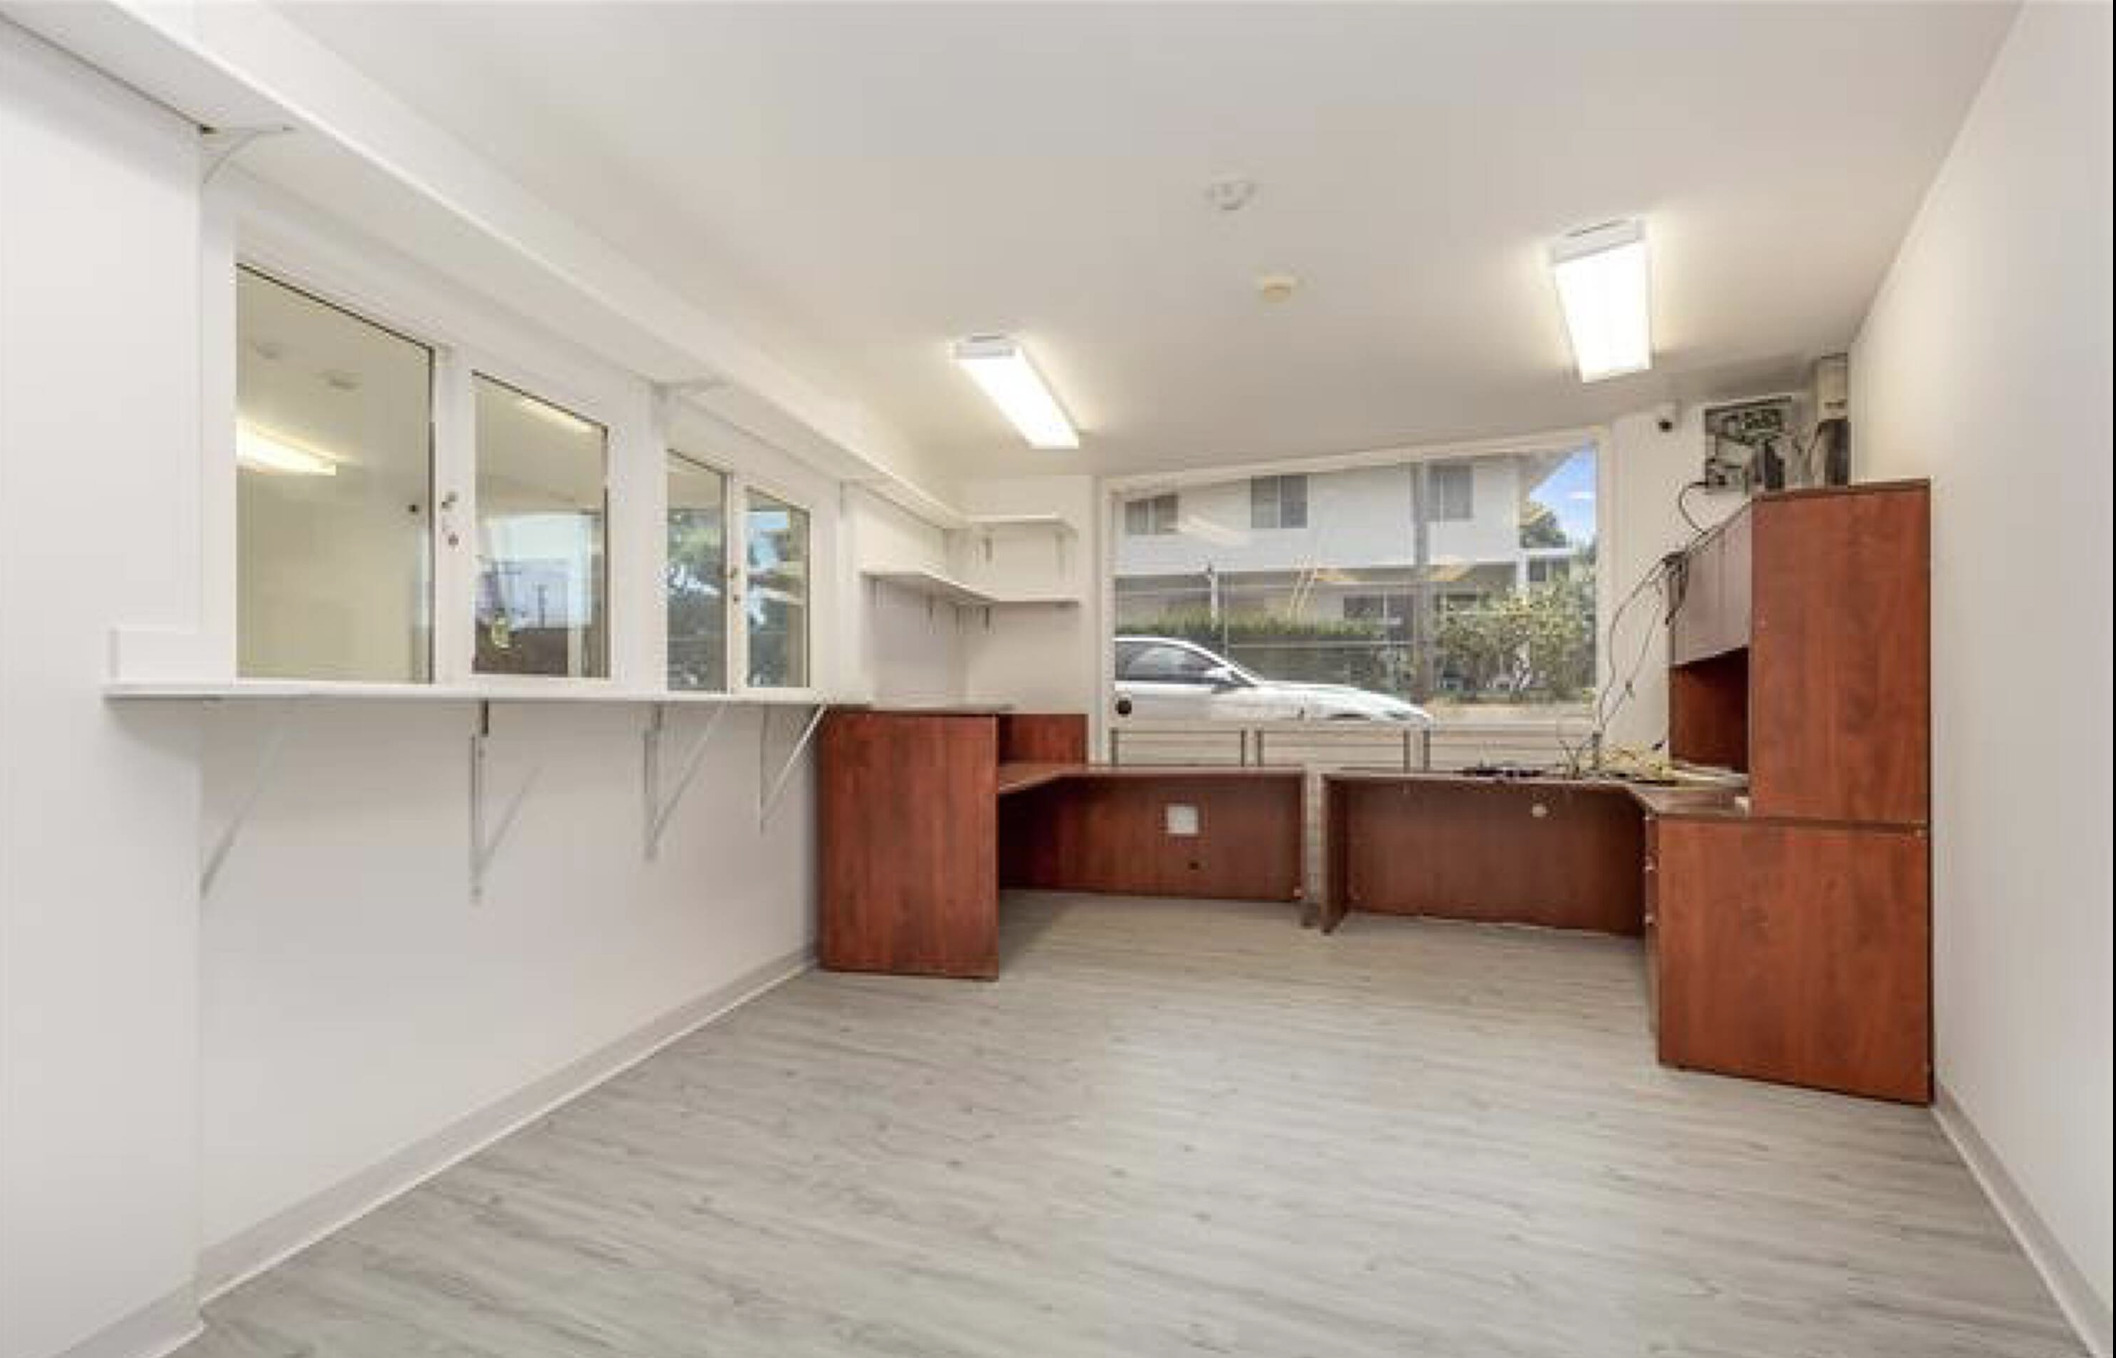 Renovated fee simple commercial unit in Kaimuki